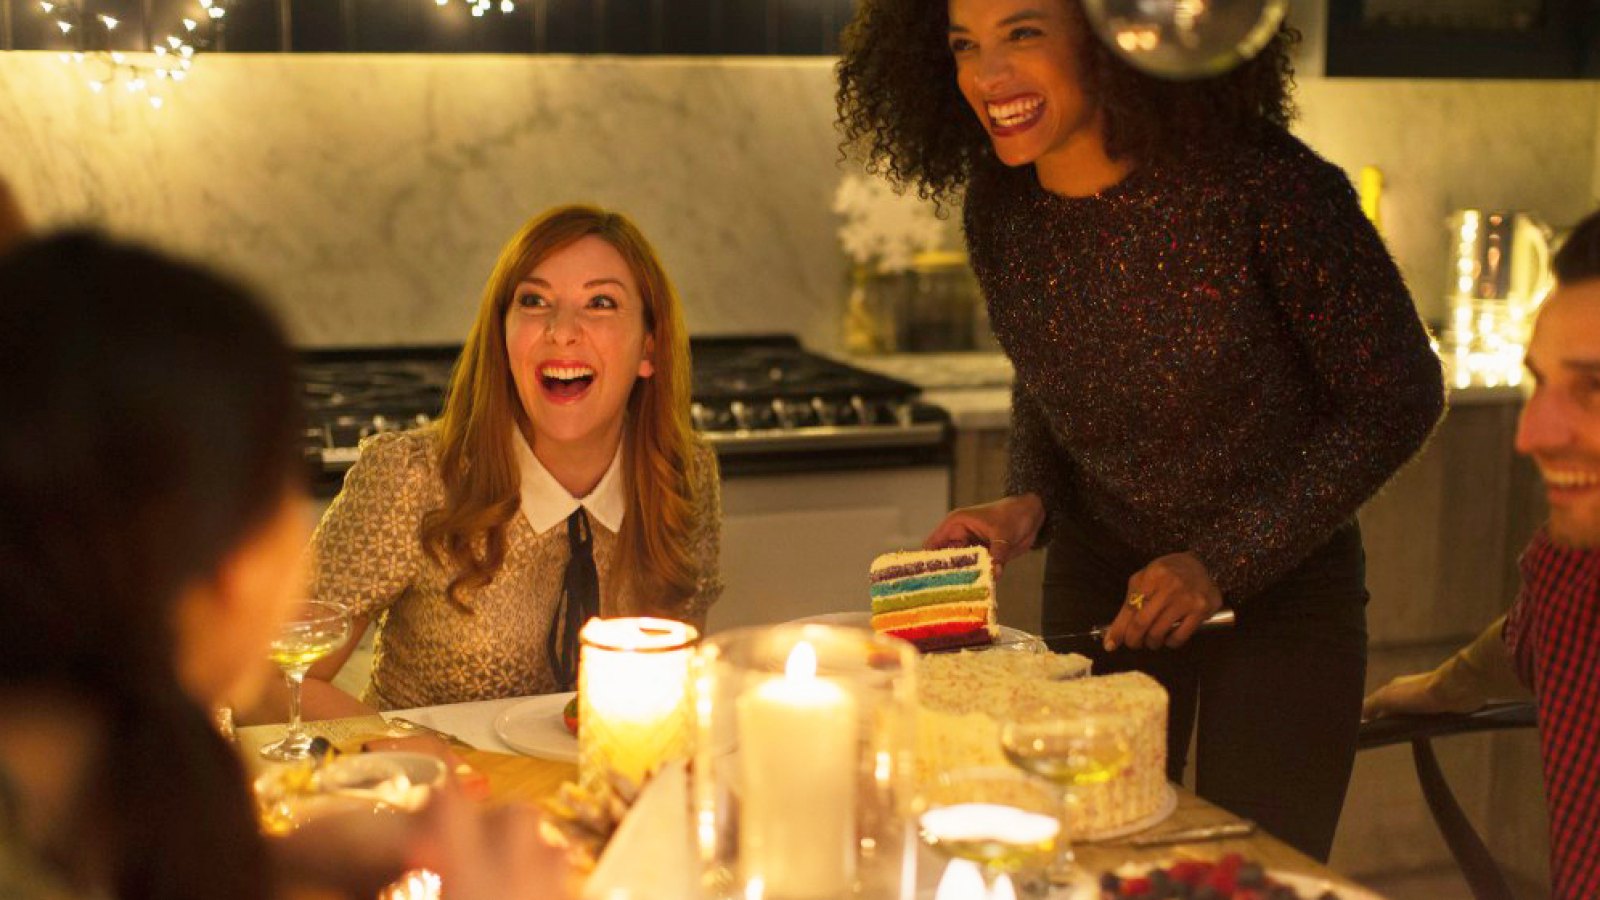 Laughing friends enjoying cake at candlelight Christmas dinner party